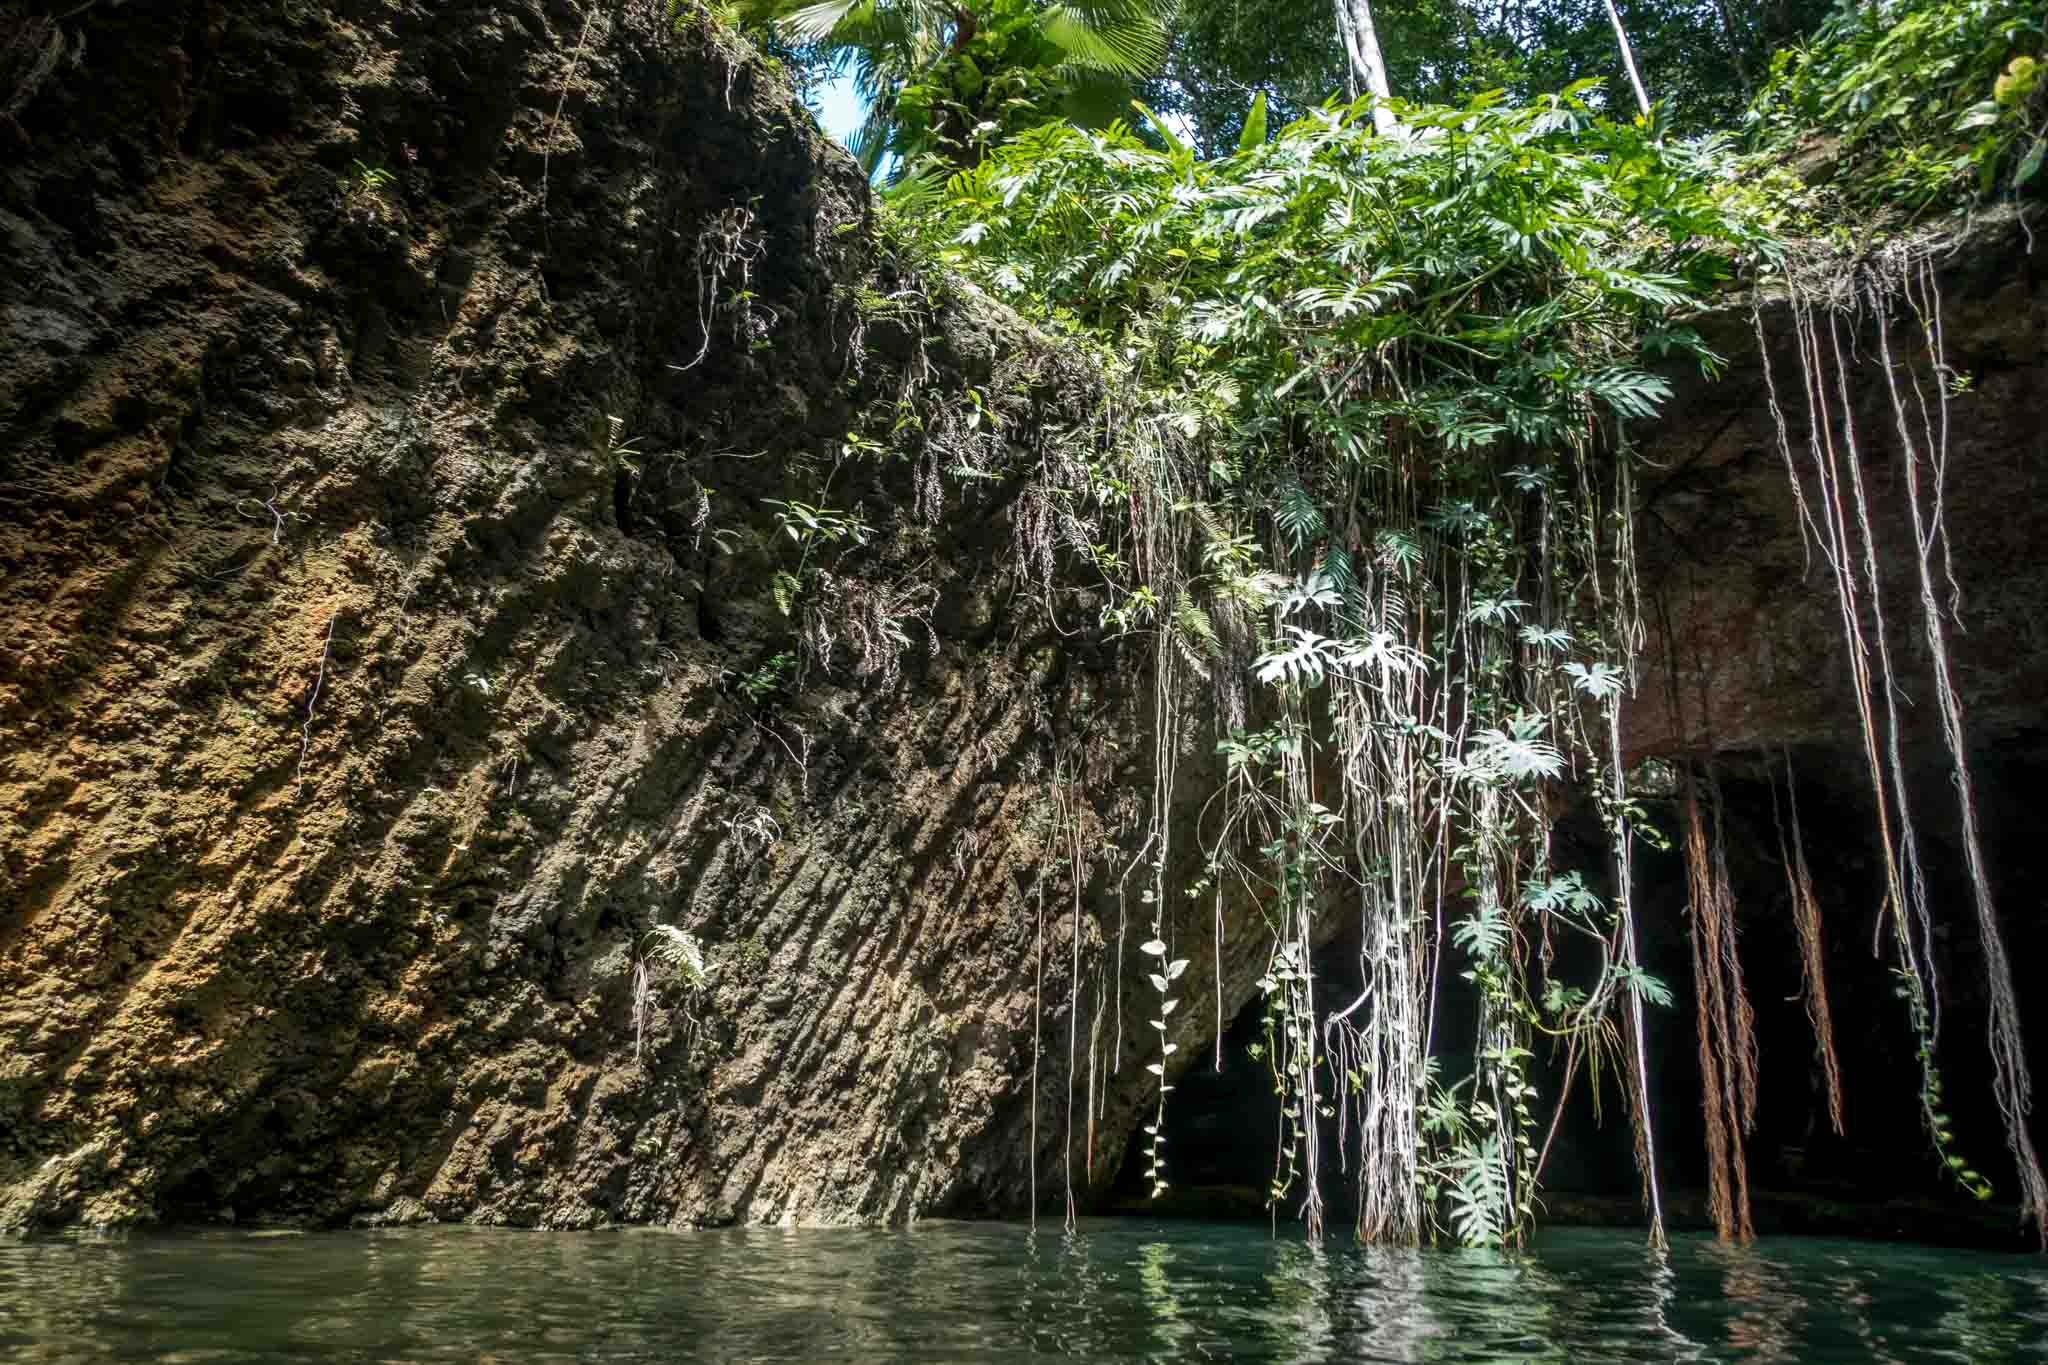 Plants and vines on the walls of a cenote